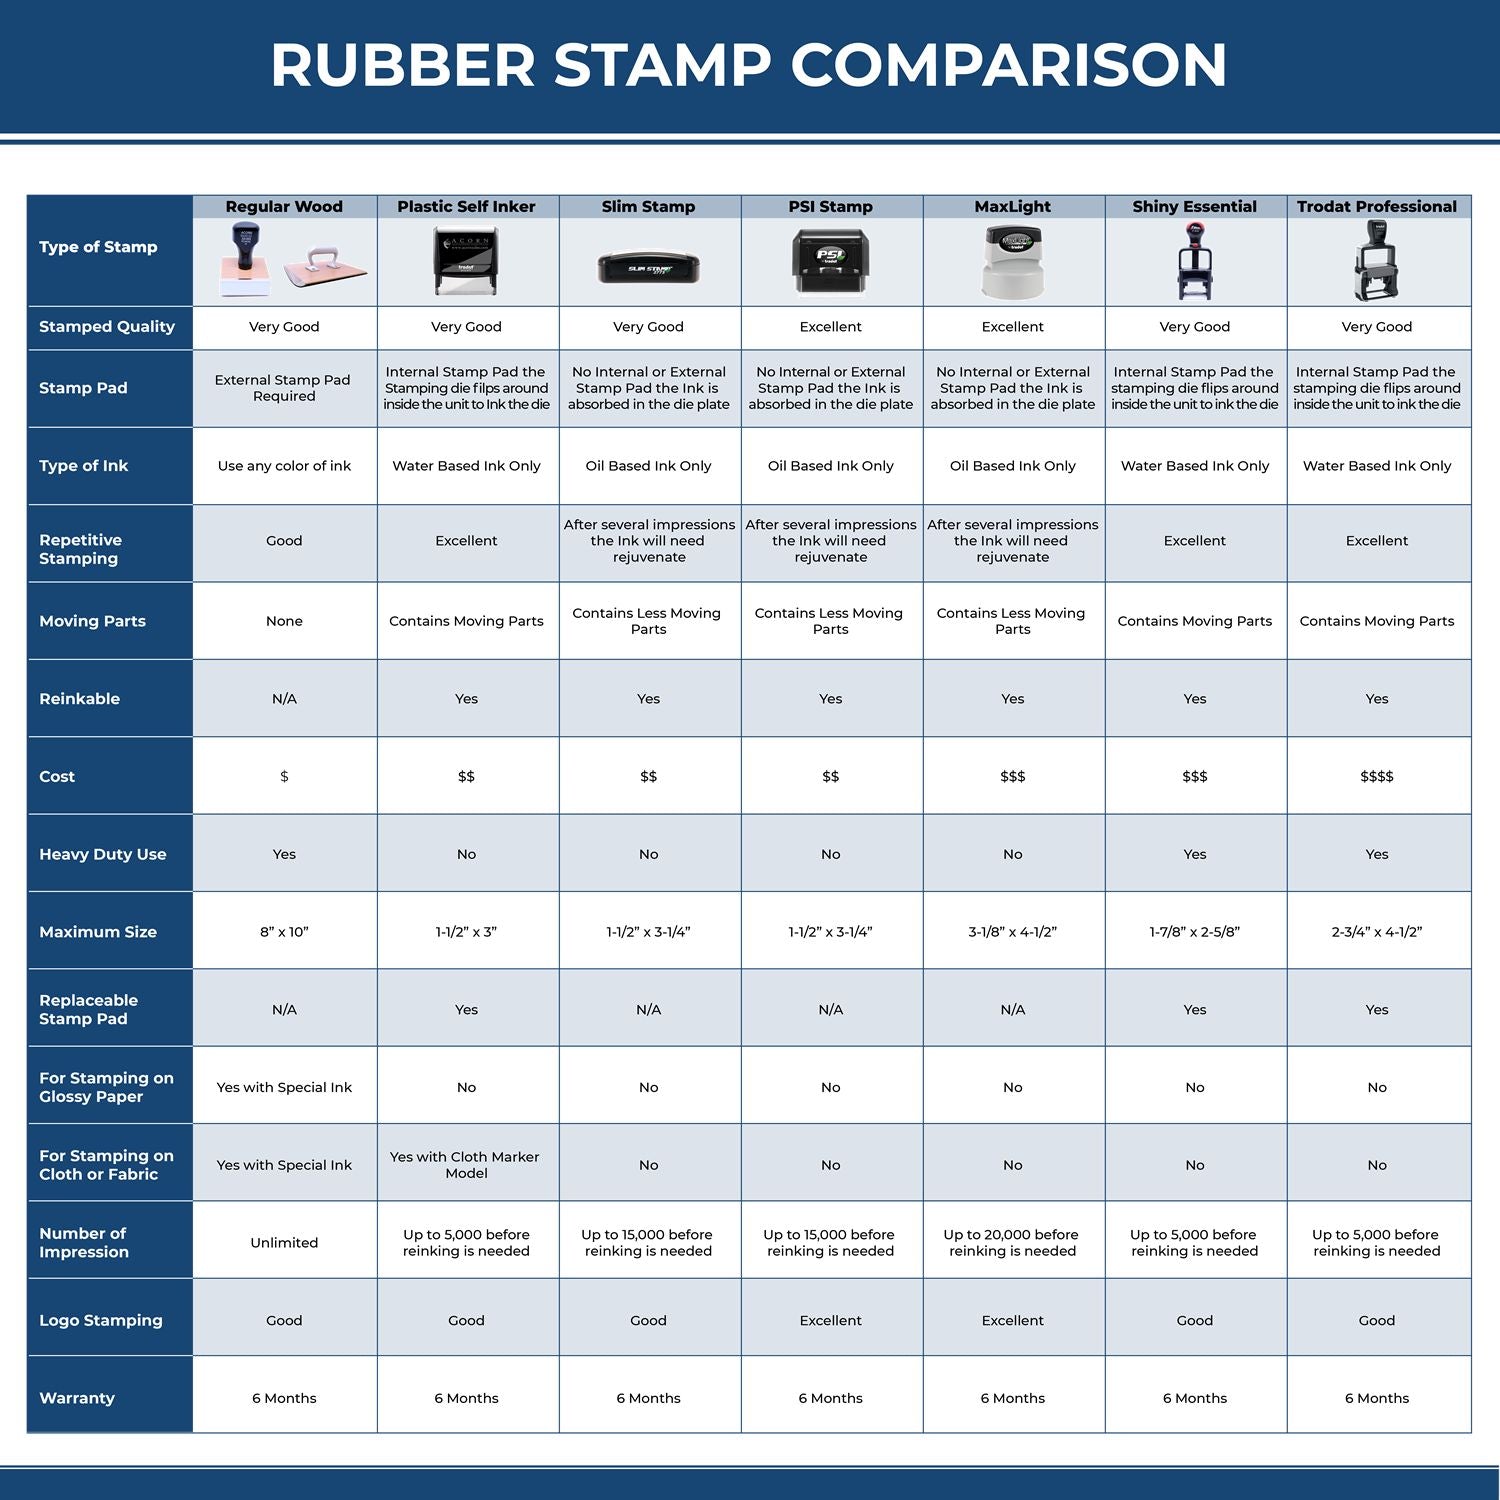 A comparison chart for the different types of mount models available for the Premium MaxLight Pre-Inked Wisconsin Engineering Stamp.